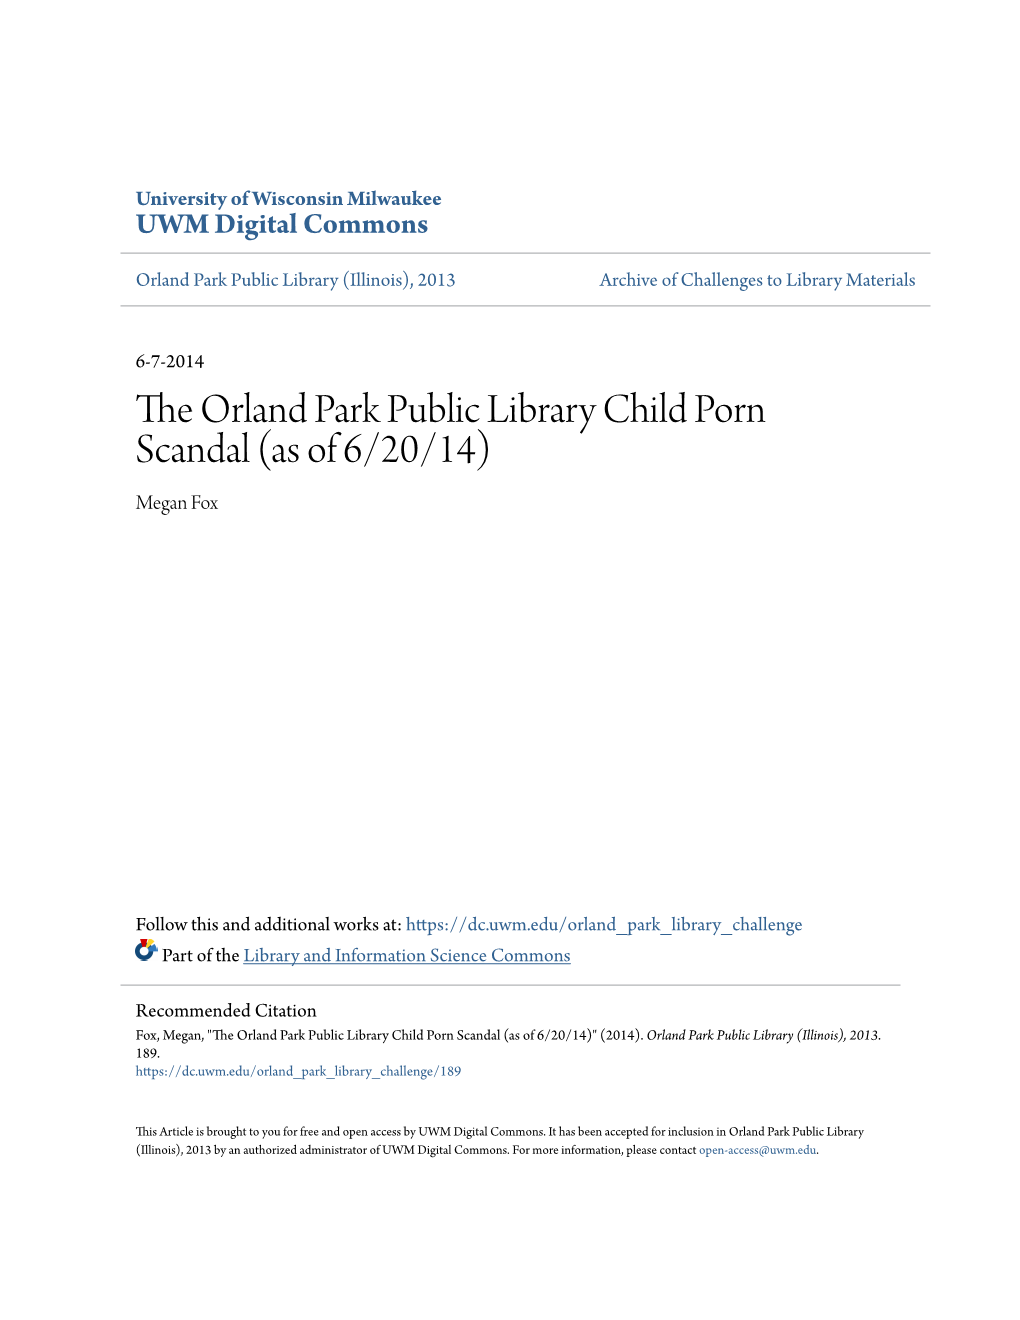 The Orland Park Public Library Child Porn Scandal (As of 6/20/14) Megan Fox